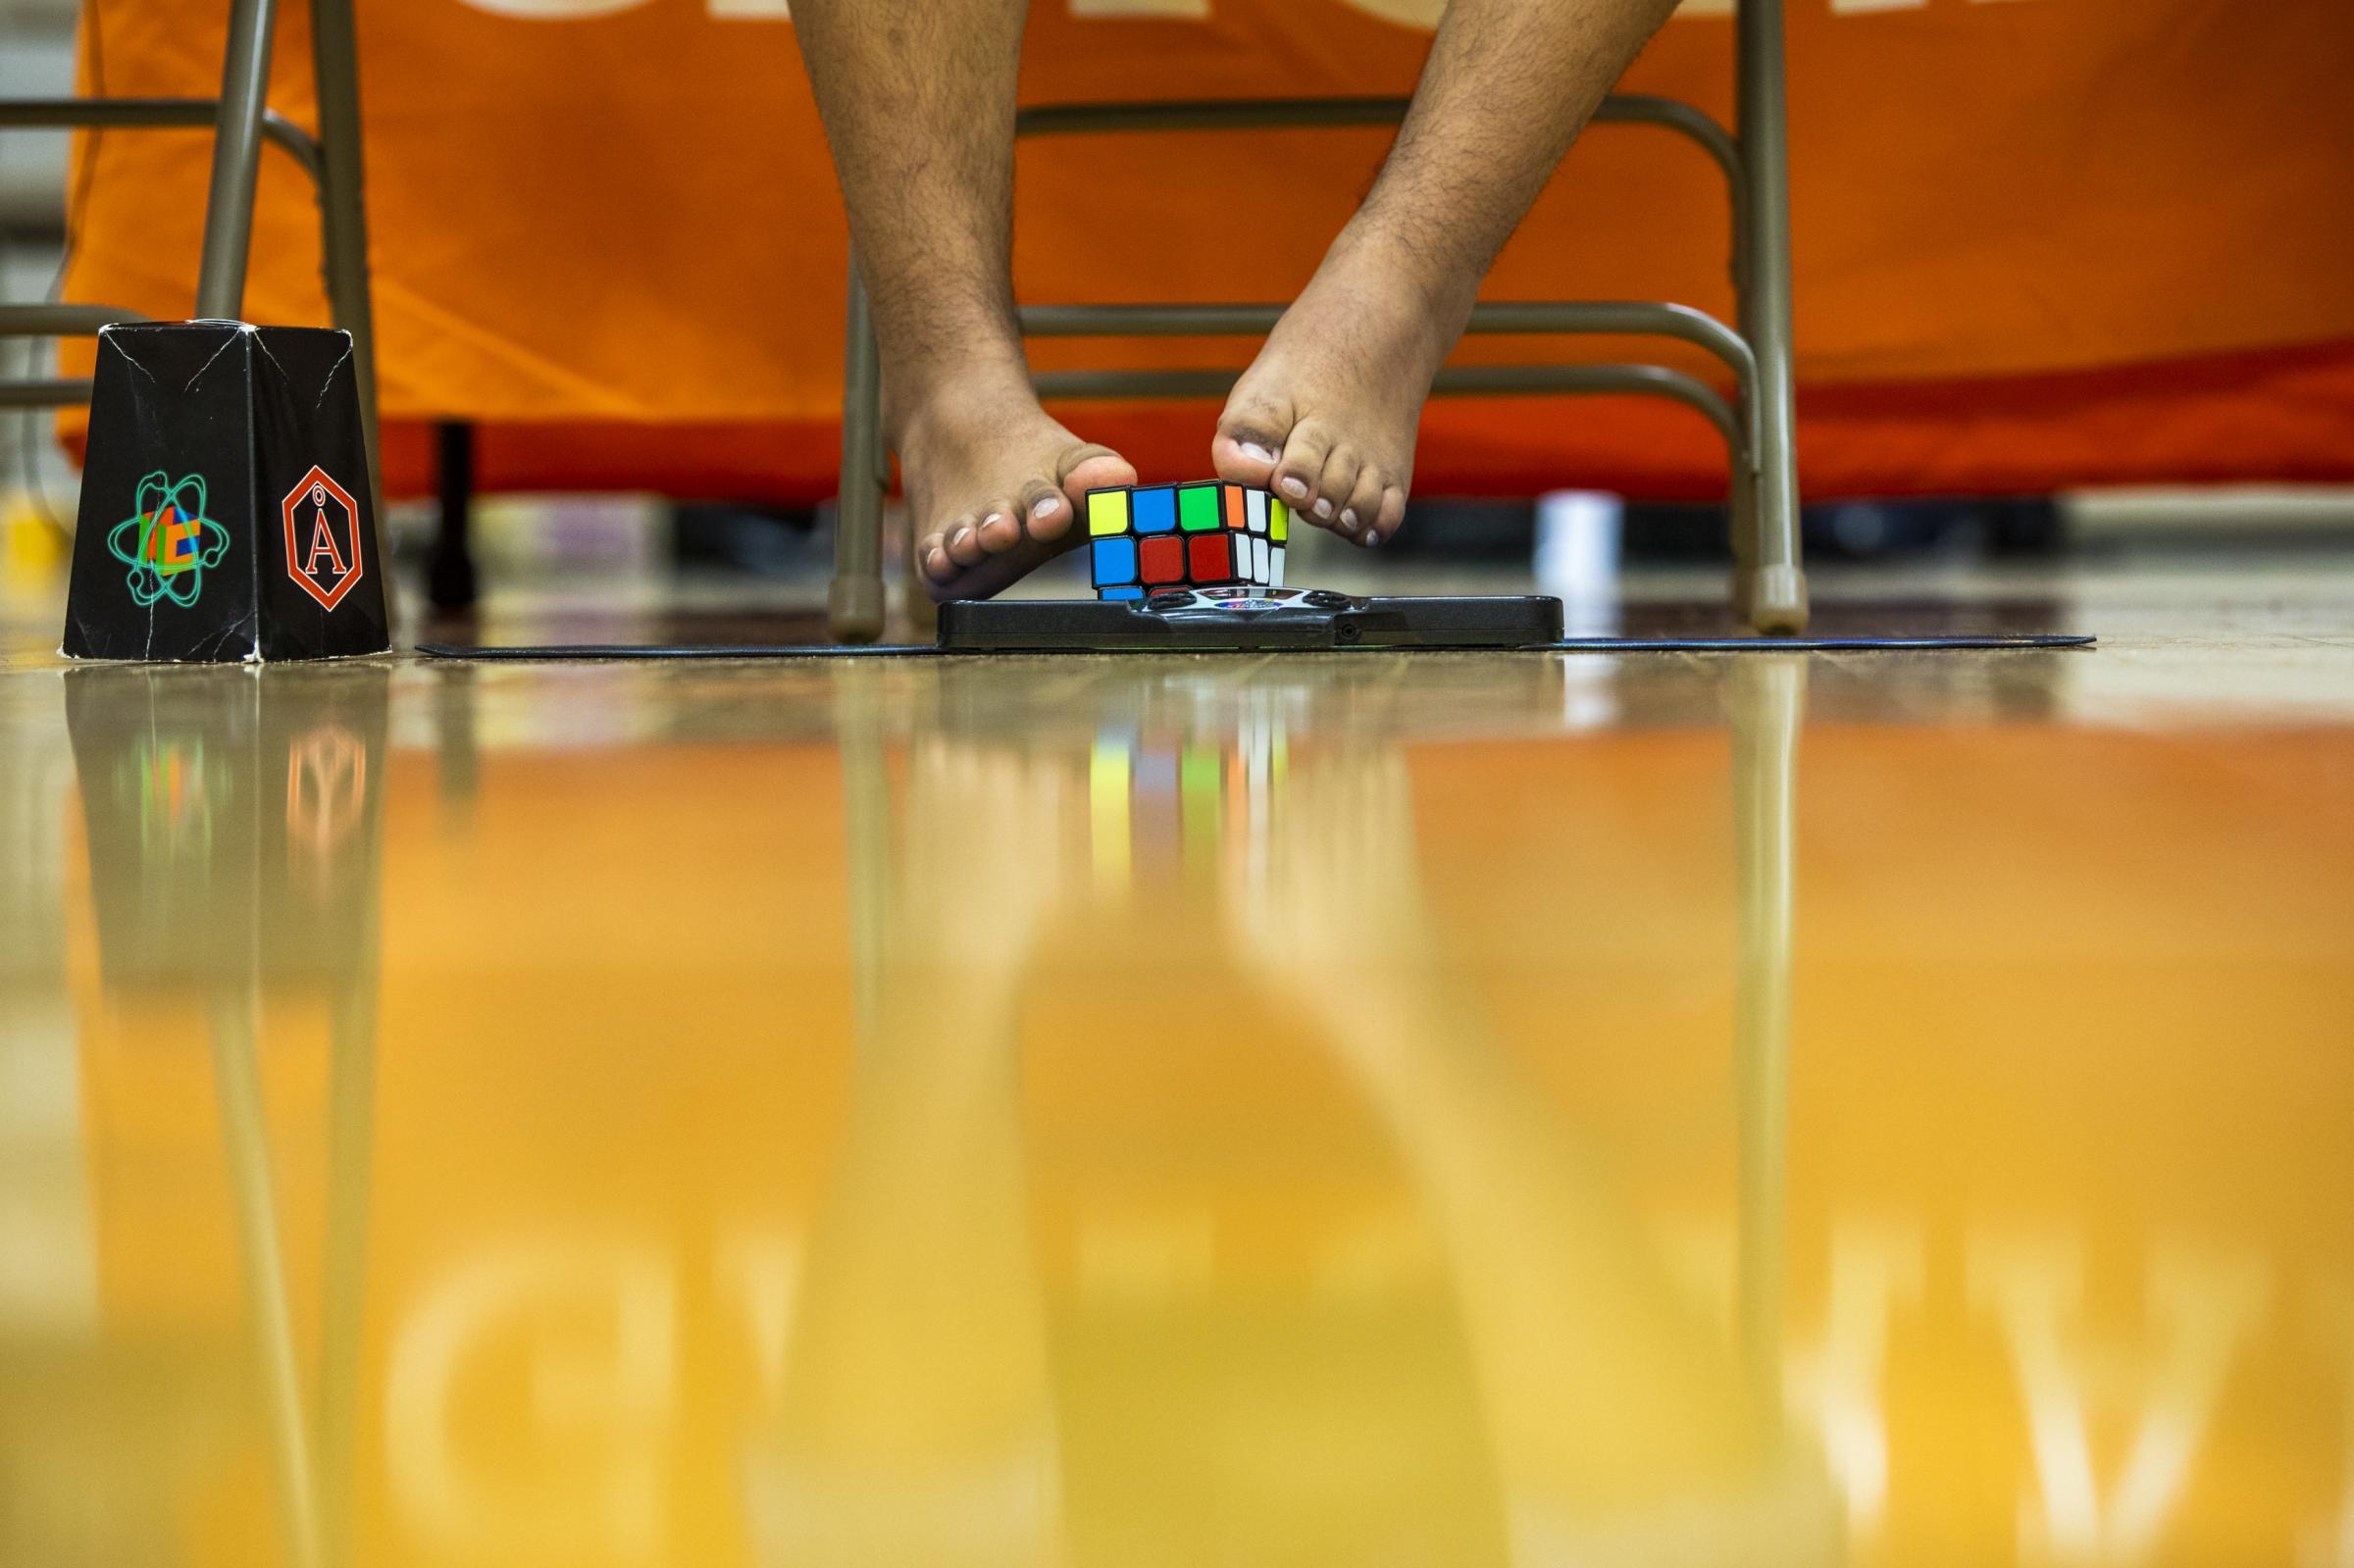 Speedcubers - Up until January 2020, the 3x3 with Feet event was a regular part of competition. The cubing...